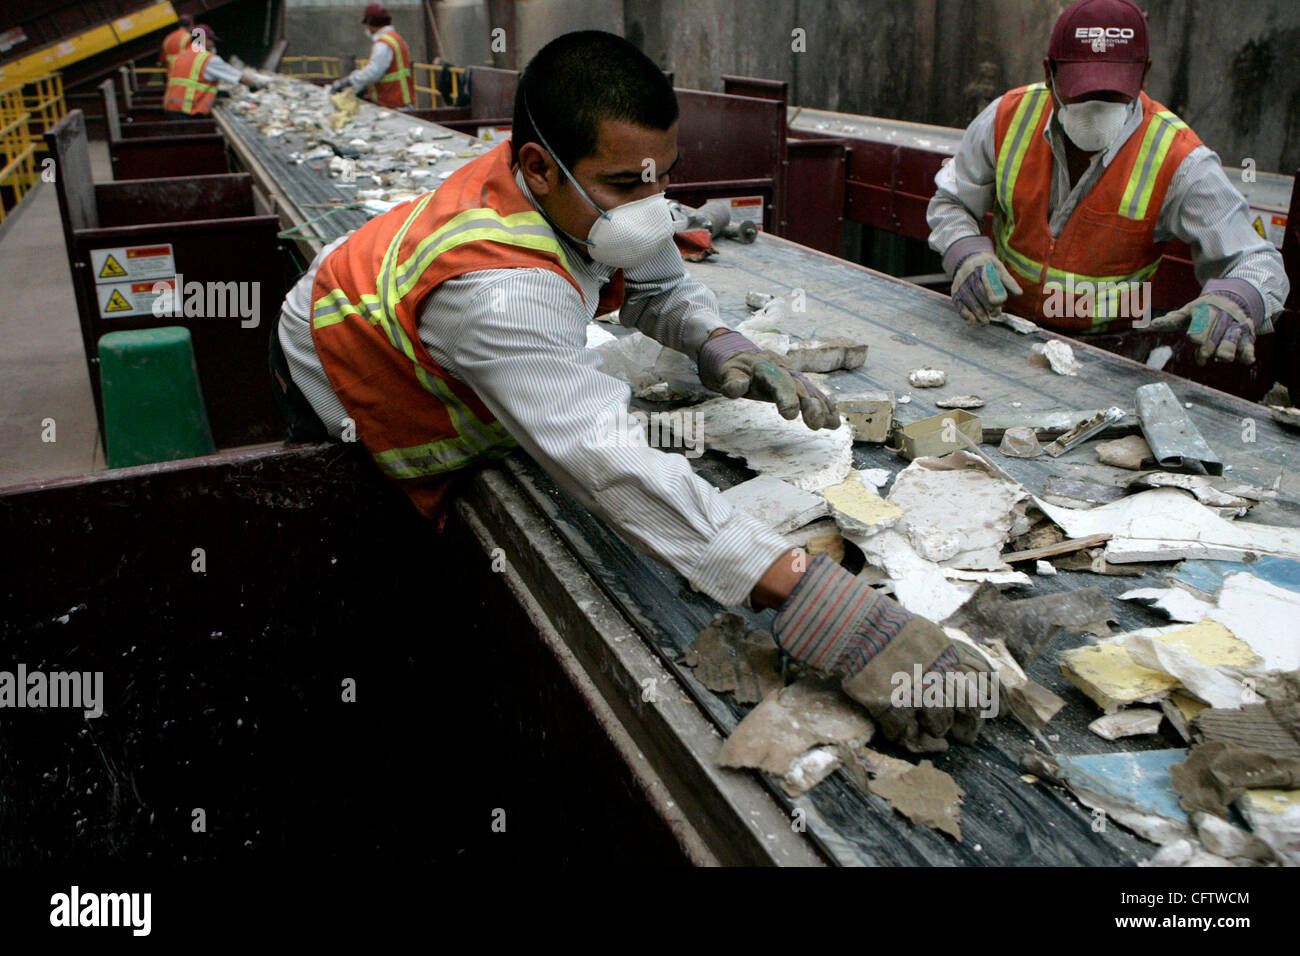 January 24, 2006 Lemon Grove, CA JAVIER RODRIGUEZ, left, and GERONIMO  ESPINOZA, right, pull drywall off a conveyor belt containing mixed  construction and demolition materials at EDCO recycling facility in Lemon  Grove.